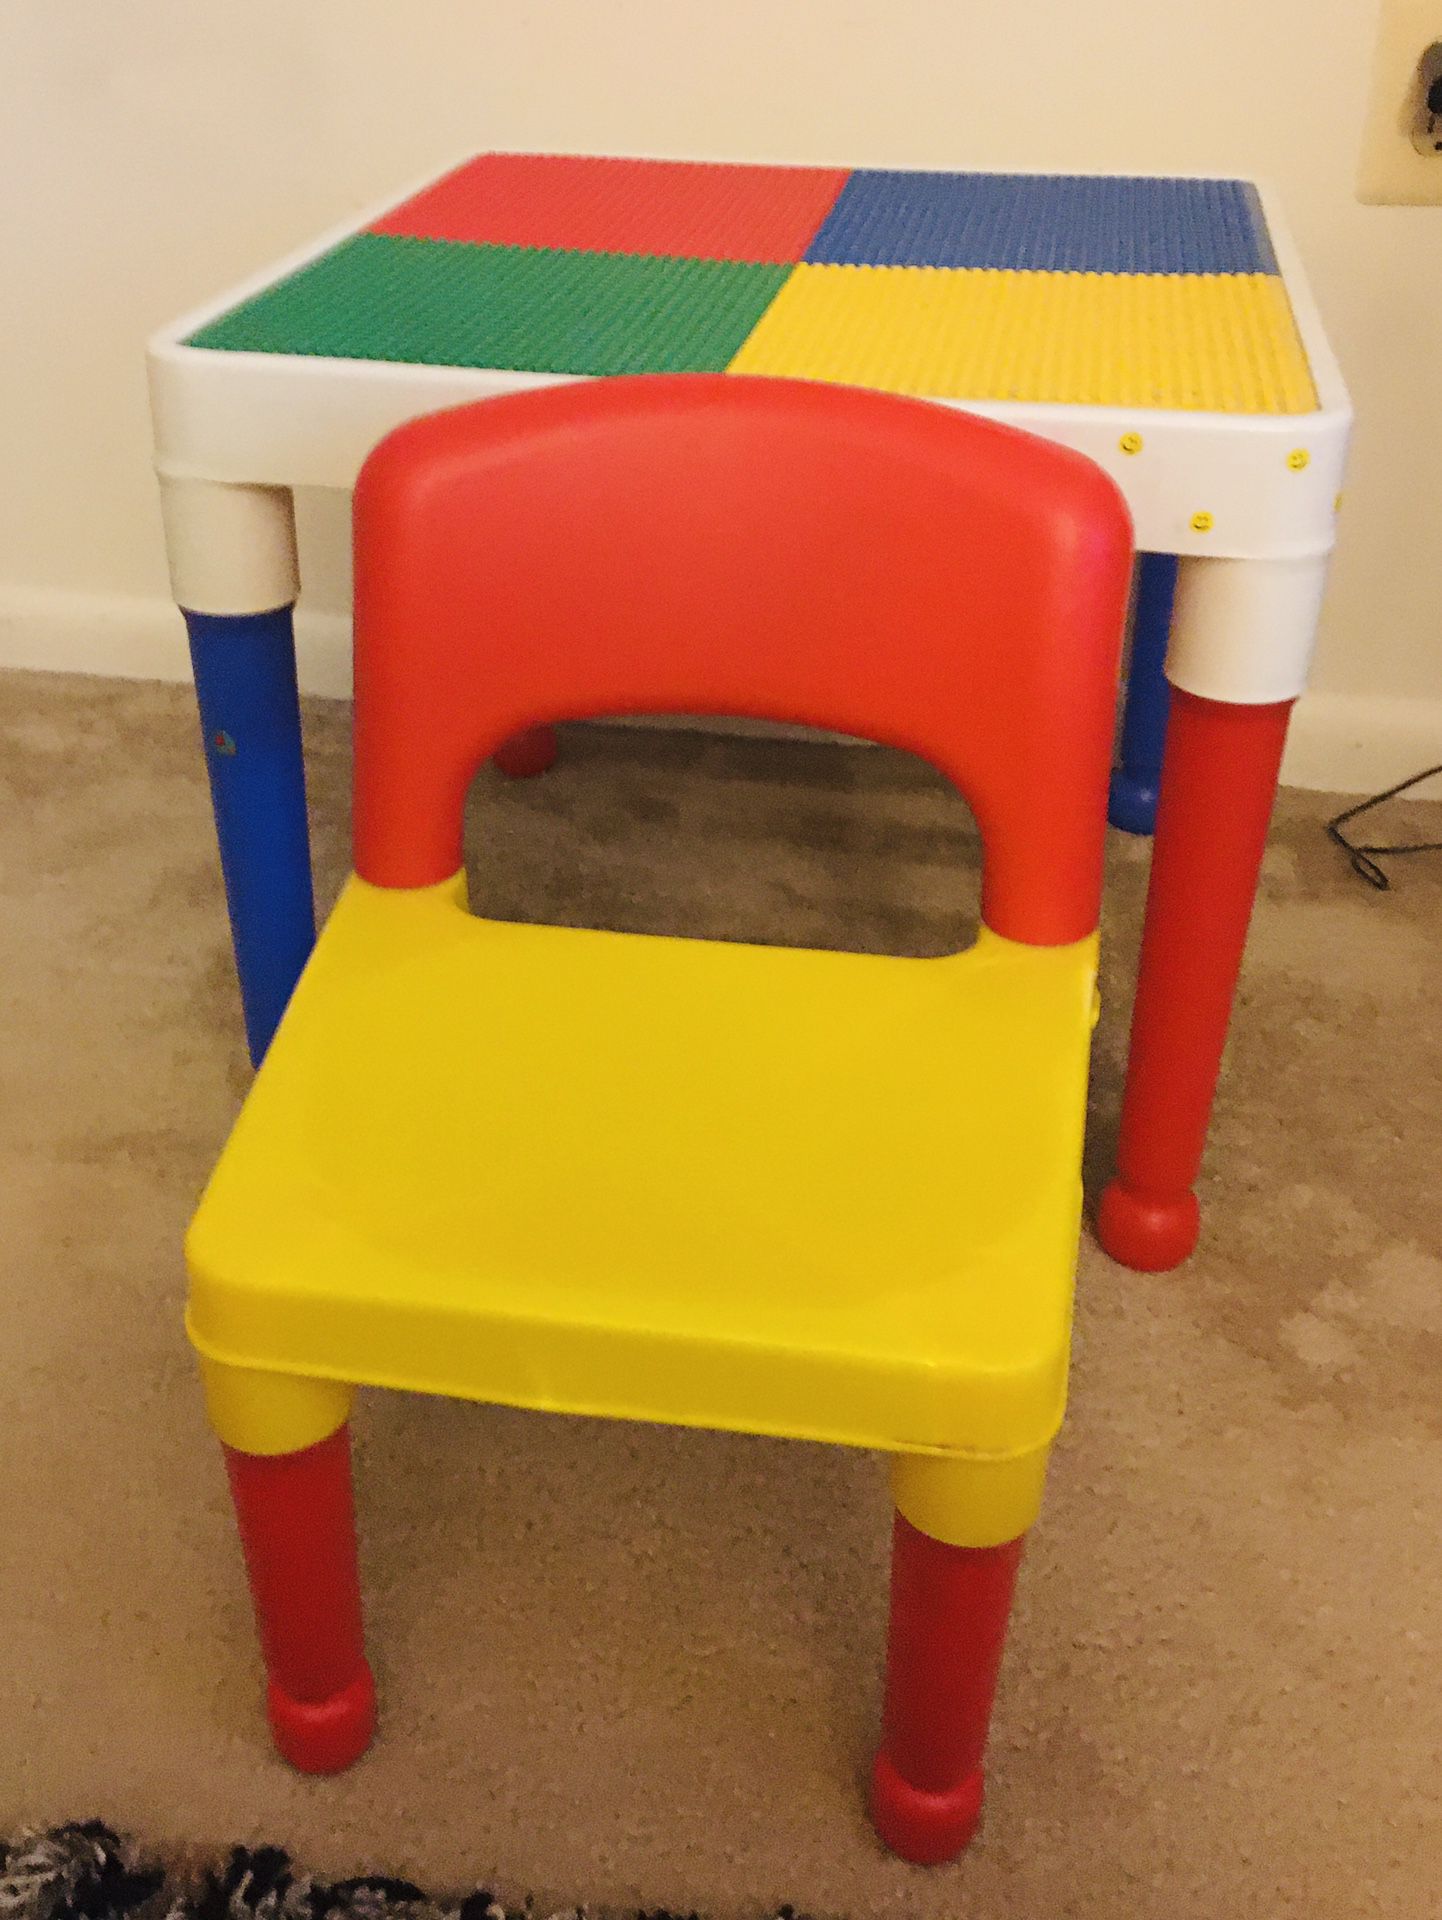 Lego activity table with chair